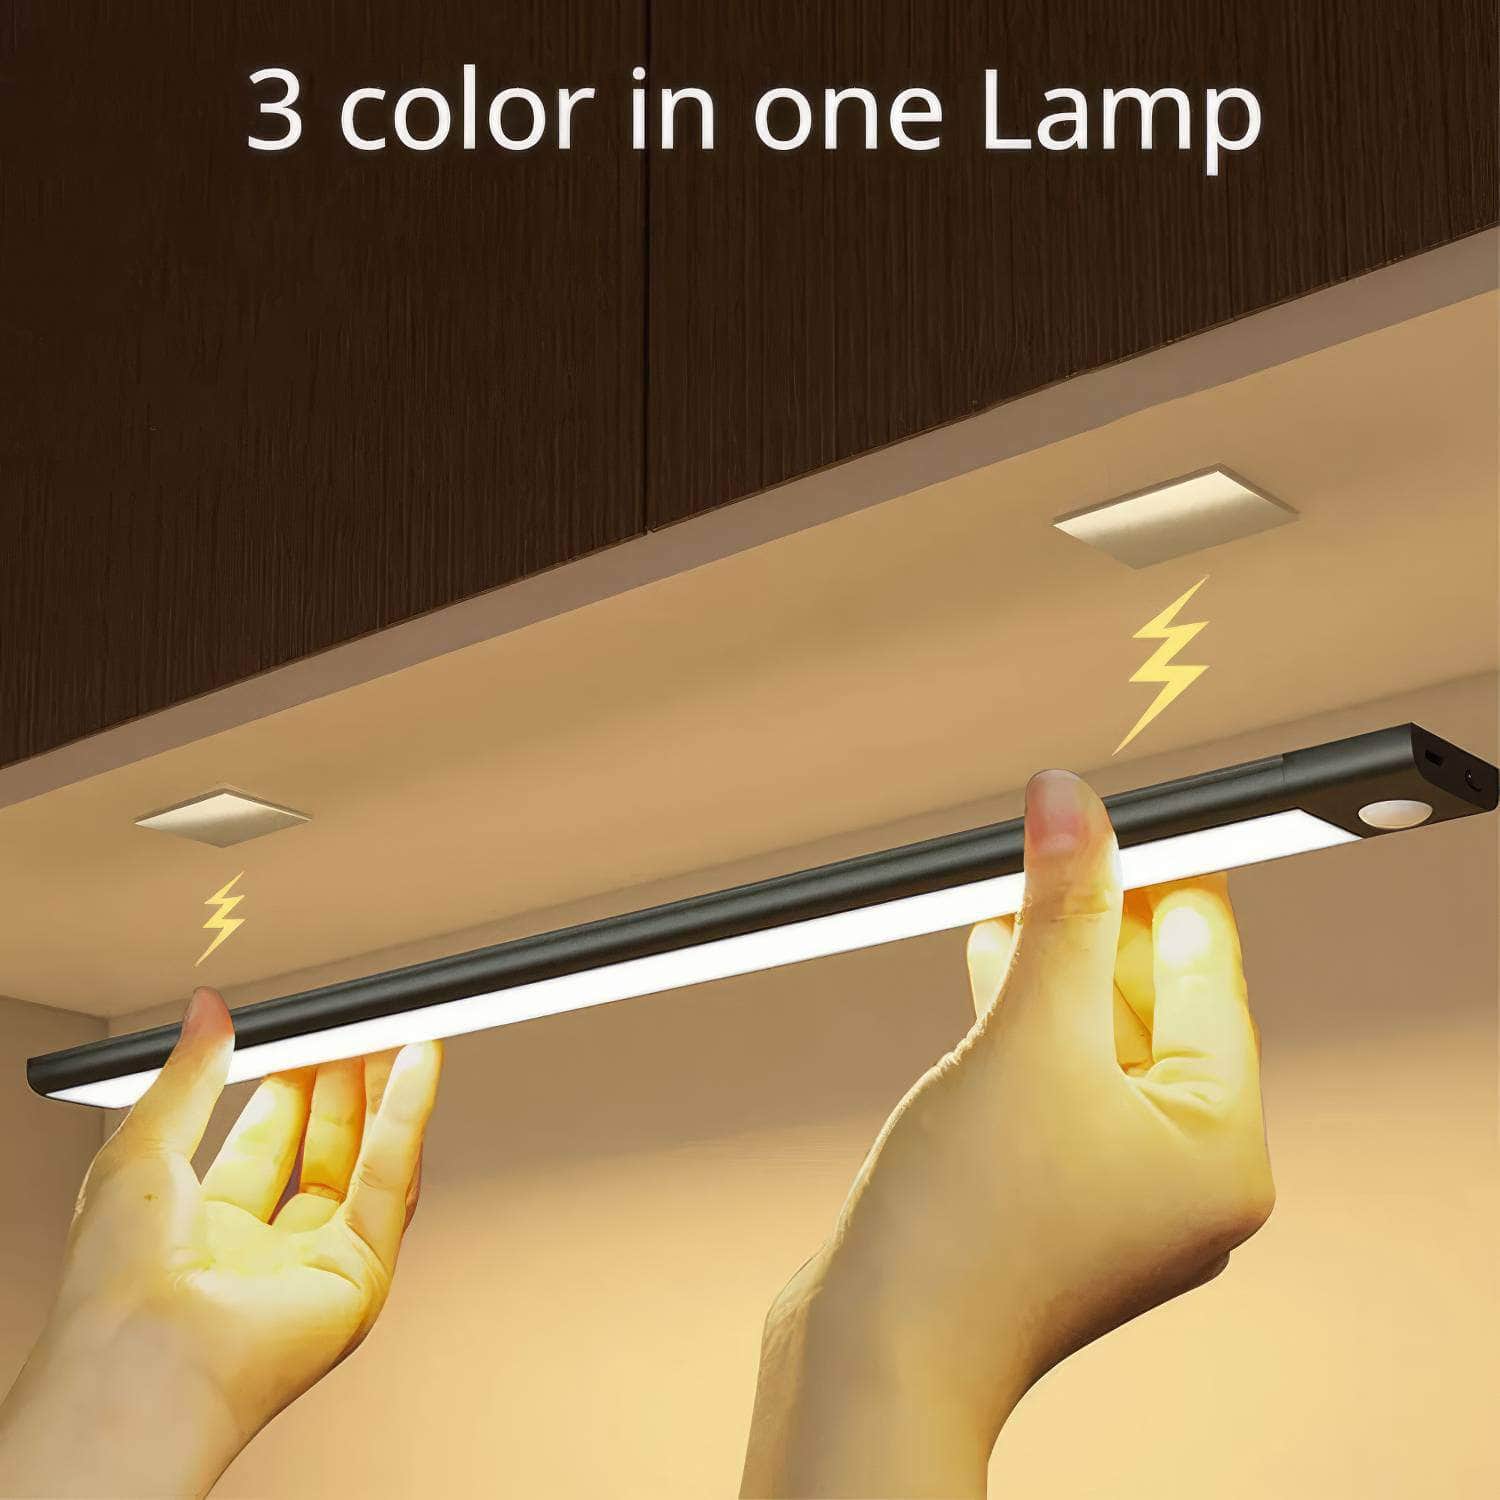 Wireless Motion Sensor LED Night Light - USB Rechargeable, Under Cabinet Lamp for Kitchen, Wardrobe, and Backlight